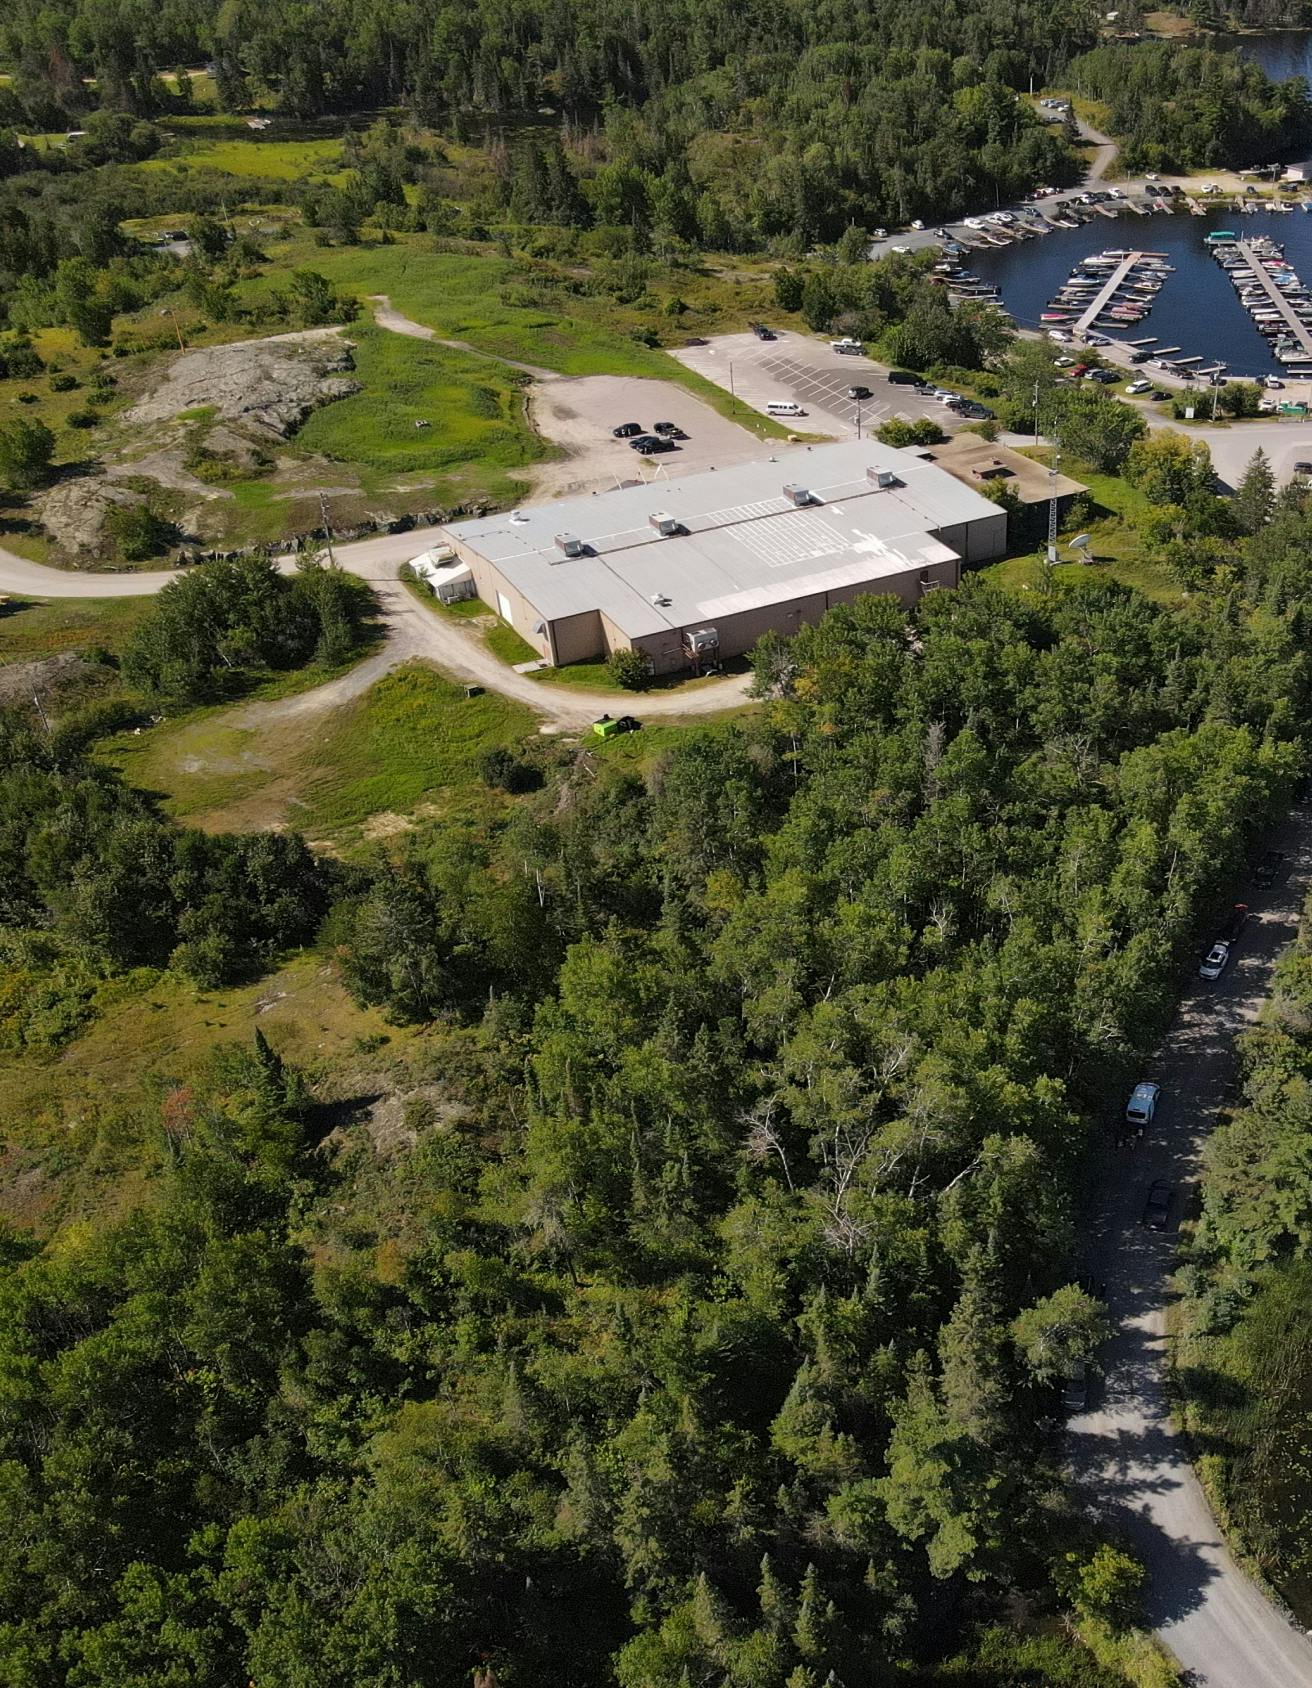 Aerial view of the bingo hall and boat dock in Wauzhushk Onigum First Nation